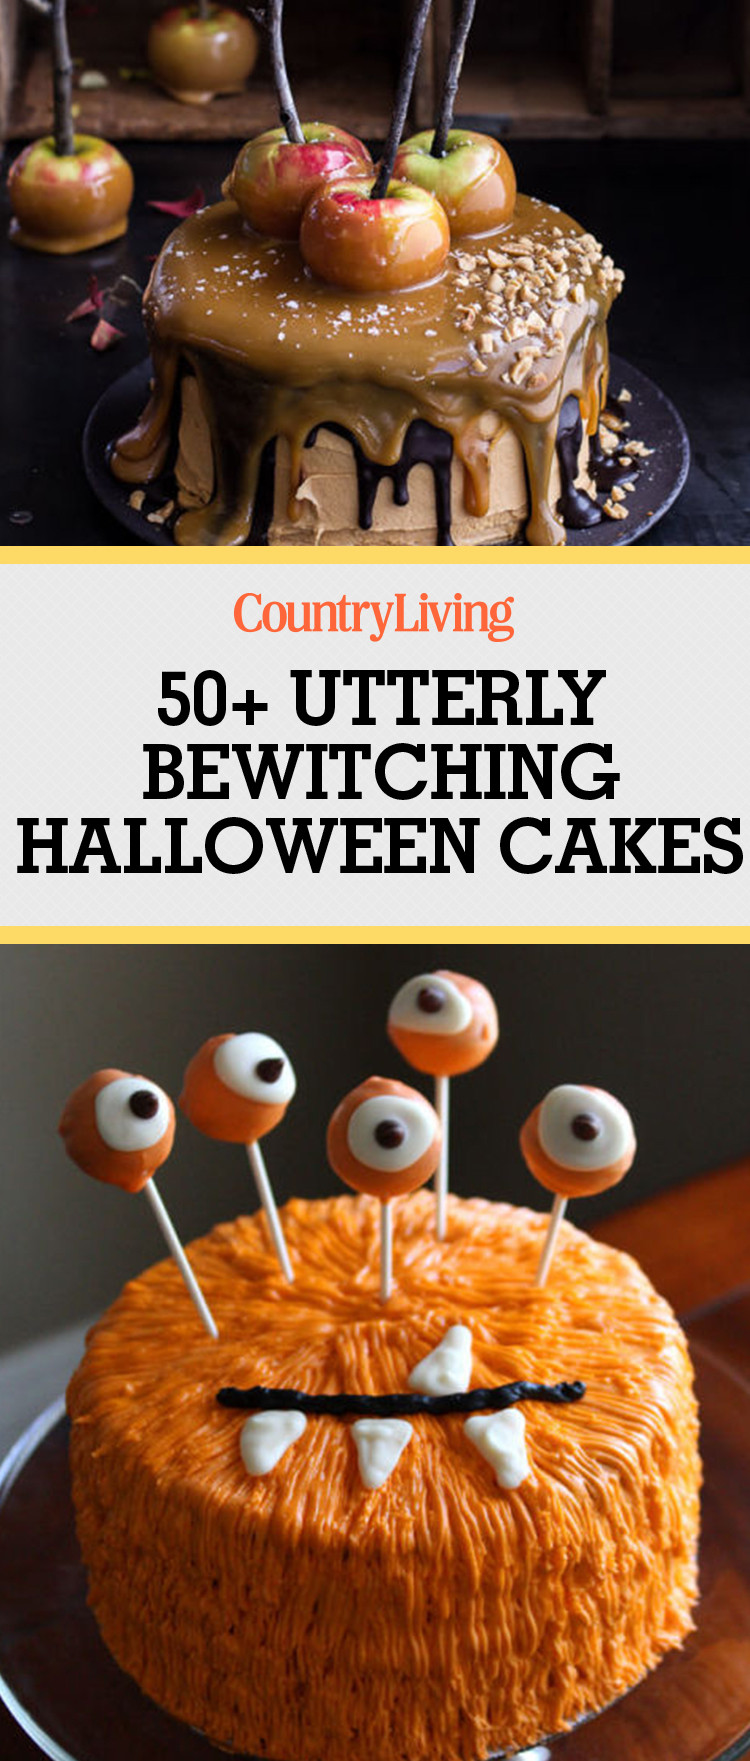 Halloween Cakes Recipes With Pictures
 61 Easy Halloween Cakes Recipes and Halloween Cake